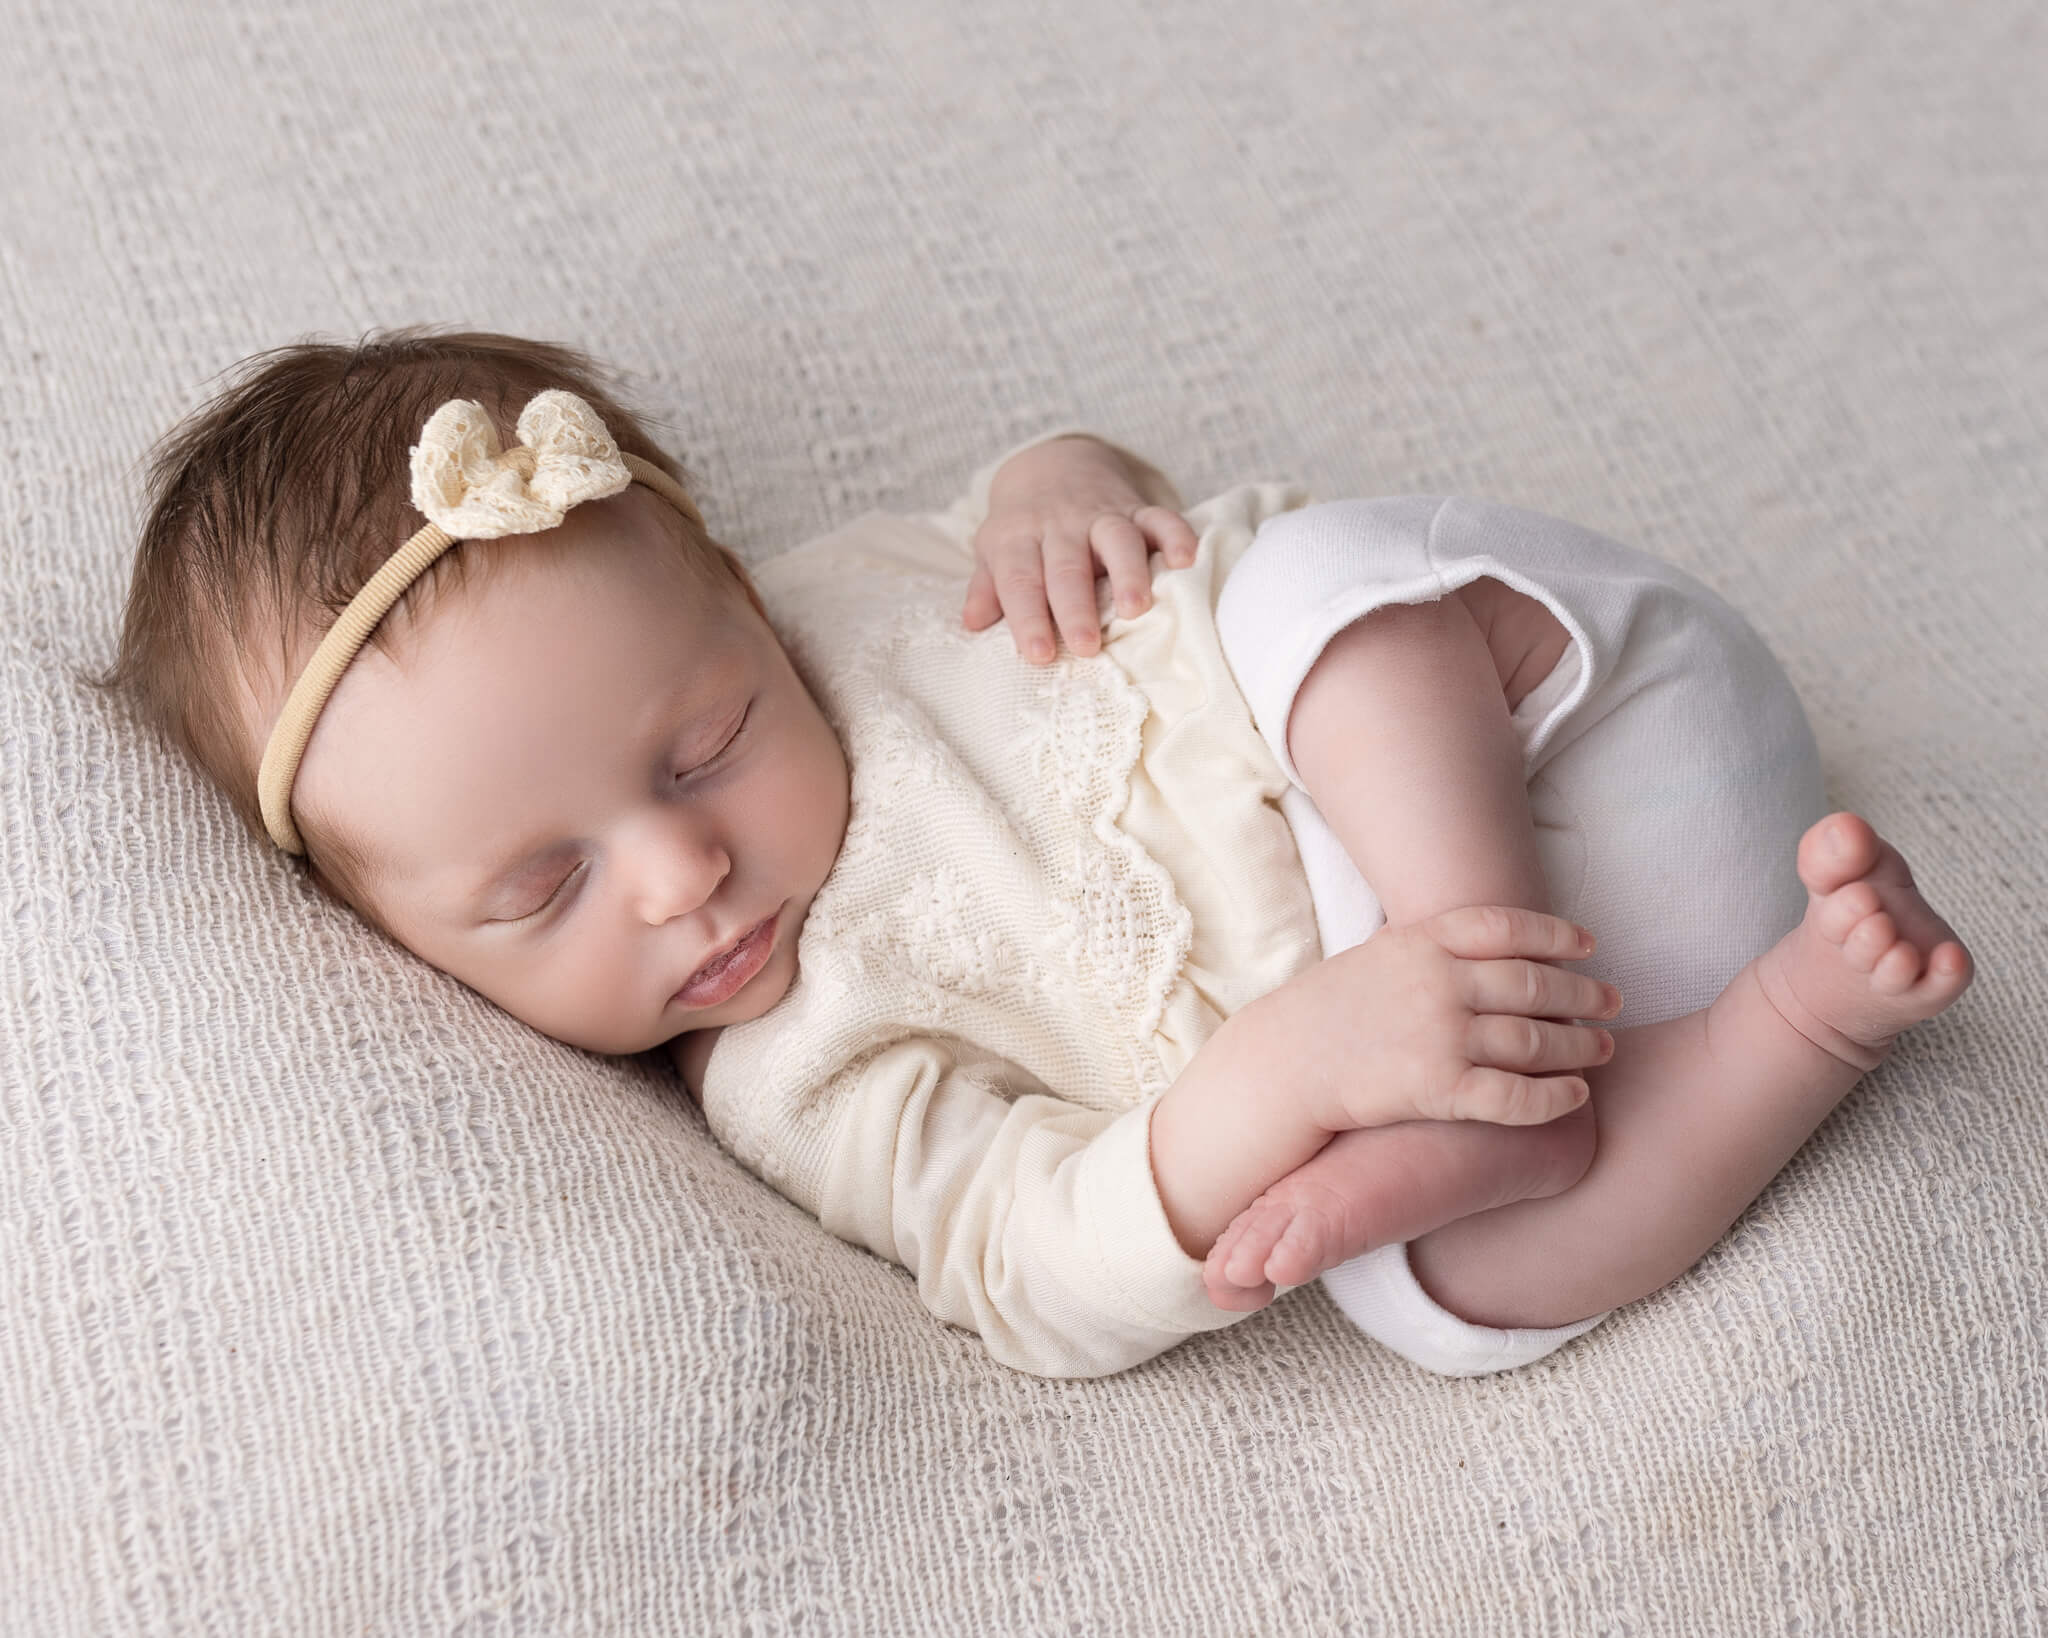 benefits of infant and newborn massage  in blog photo sleeping newborn girl in white outfit on white blanket